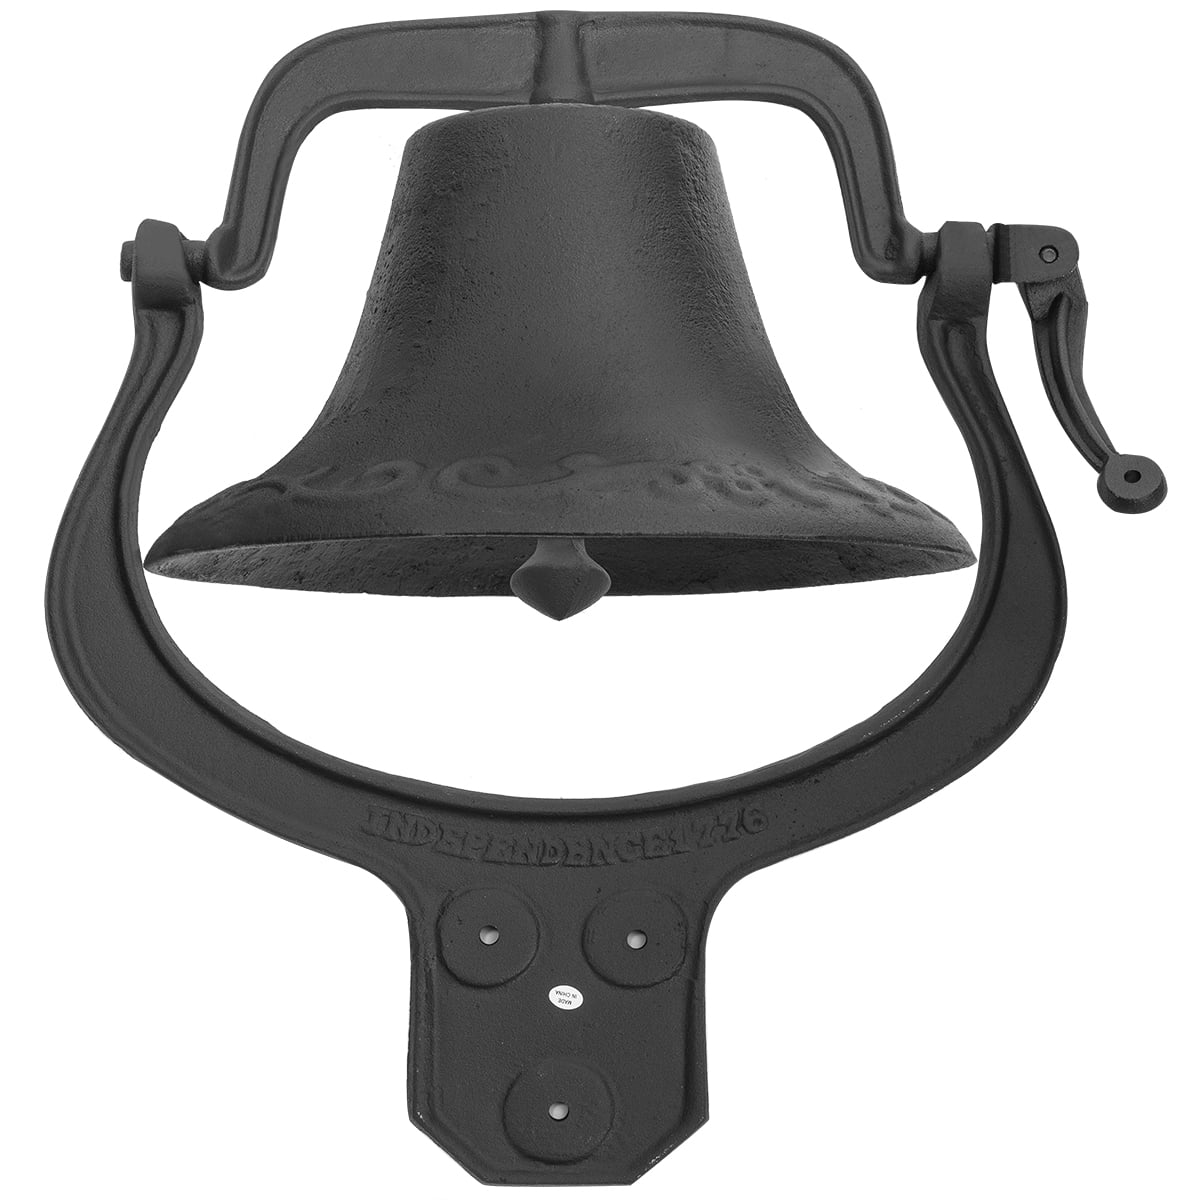 XtremepowerUS Large Cast Iron Farmhouse Antique Dinner School Bell Vintage  Style Church Bell -Black